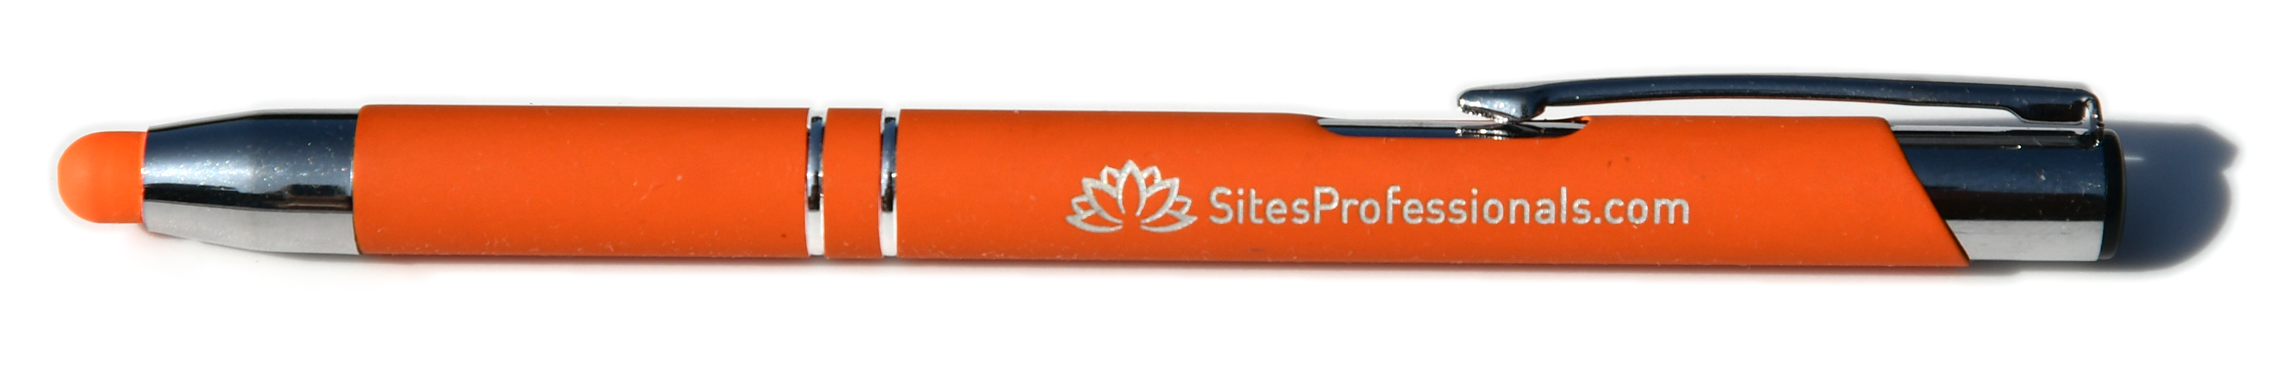 Stylus and Pen from Sites Professionals